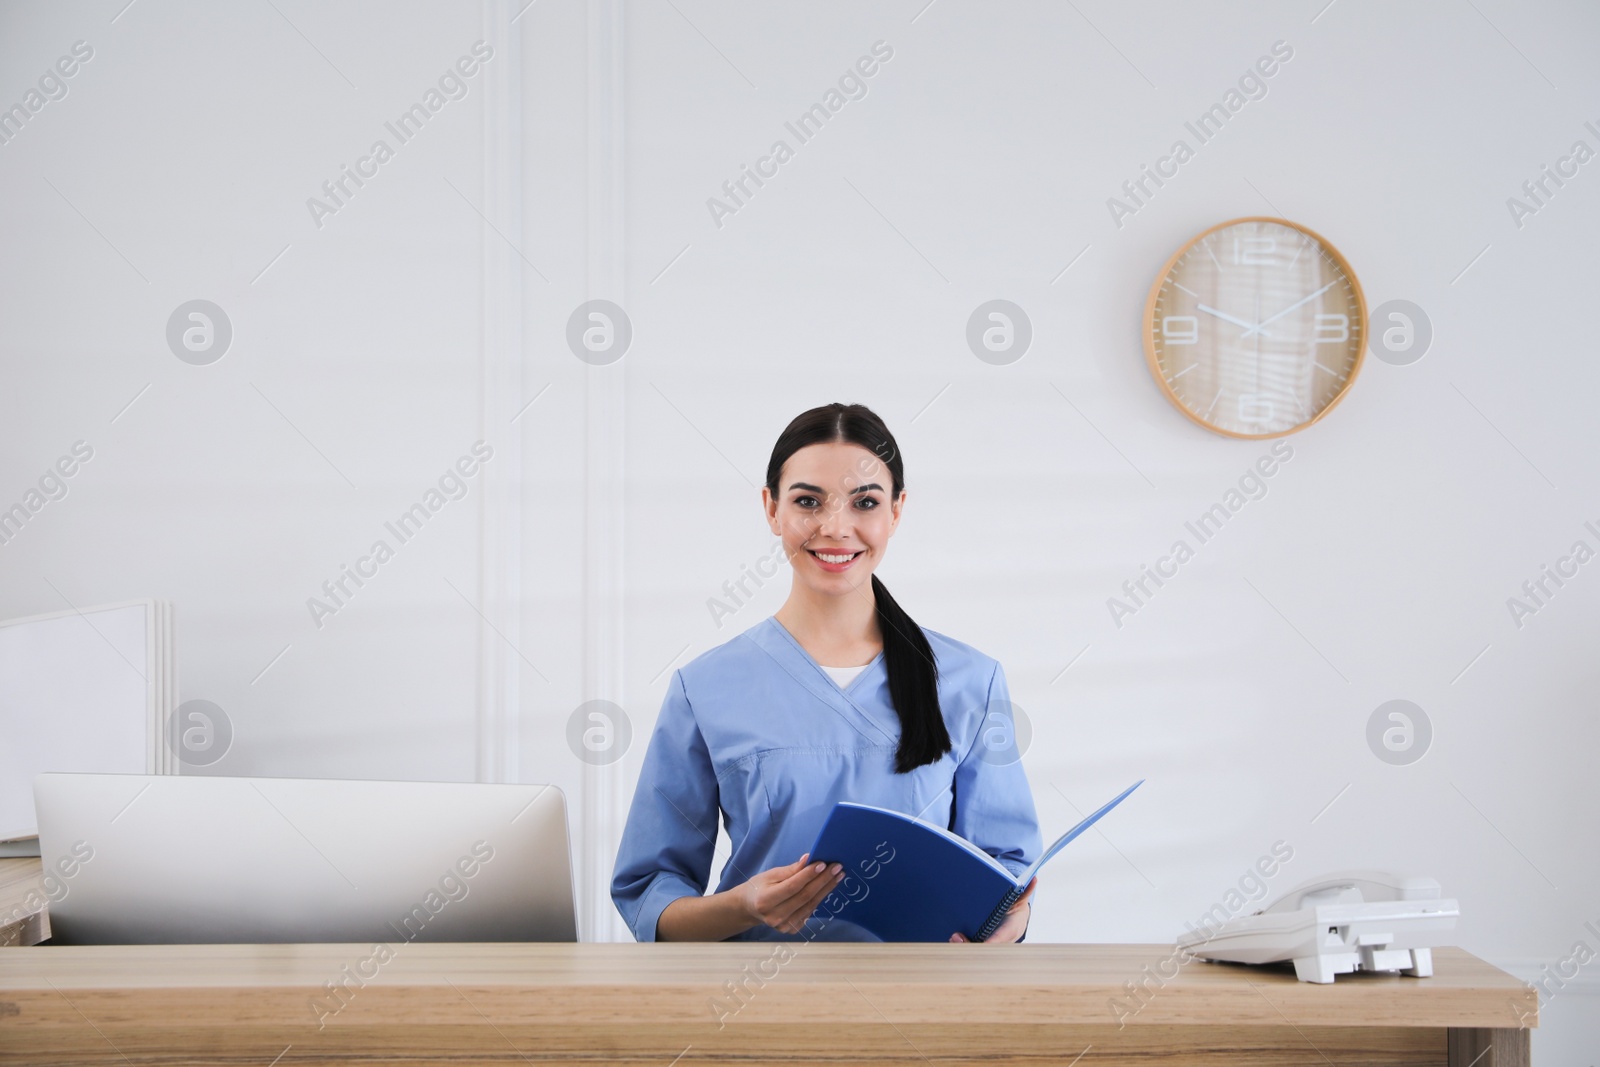 Photo of Receptionist with document case at countertop in hospital